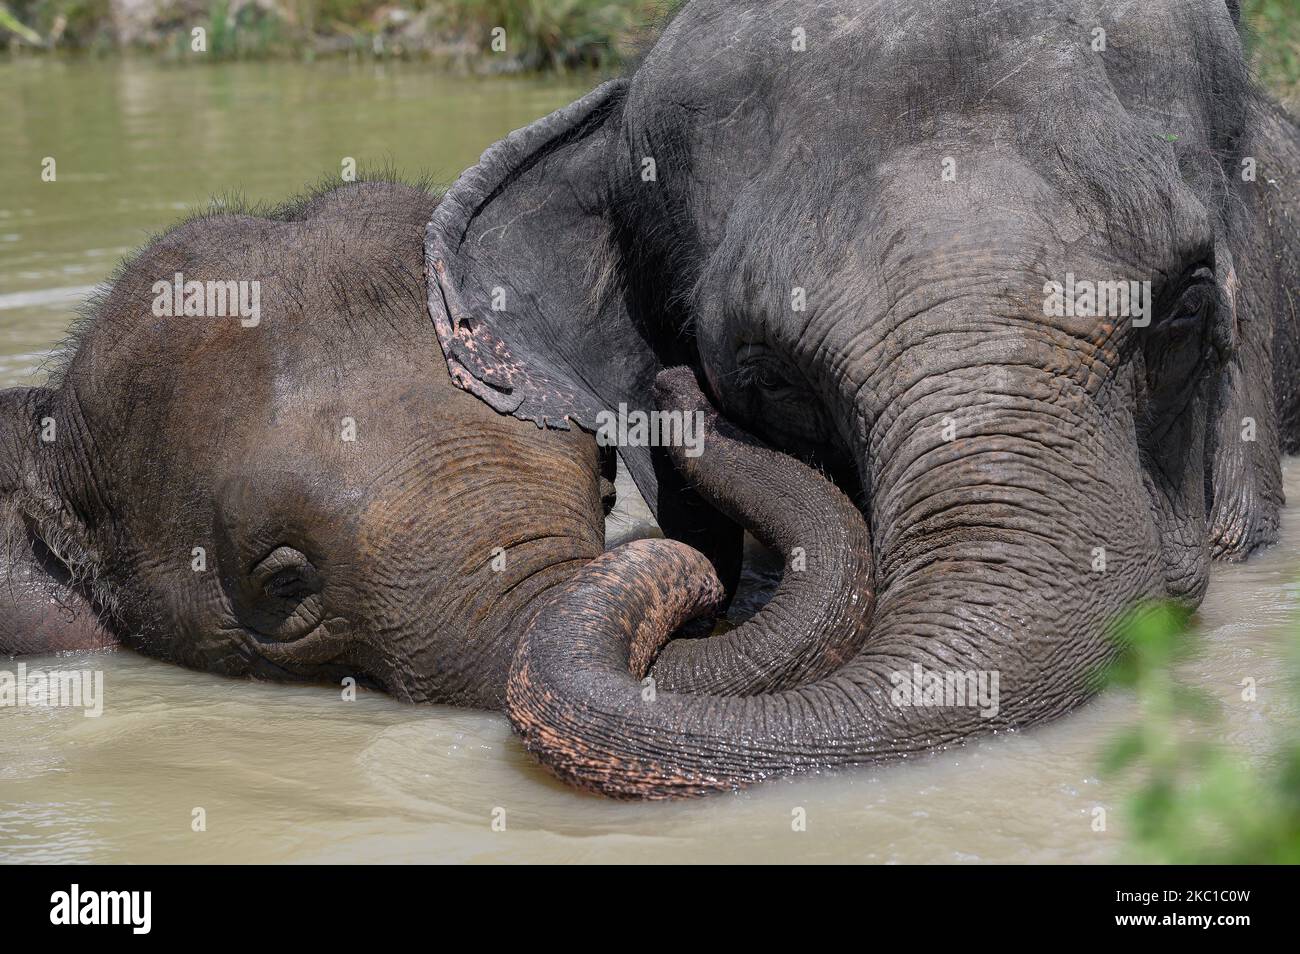 An Asian elephant and a baby elephant lie in a pond, hugging each other with their trunks. Close-up. Stock Photo